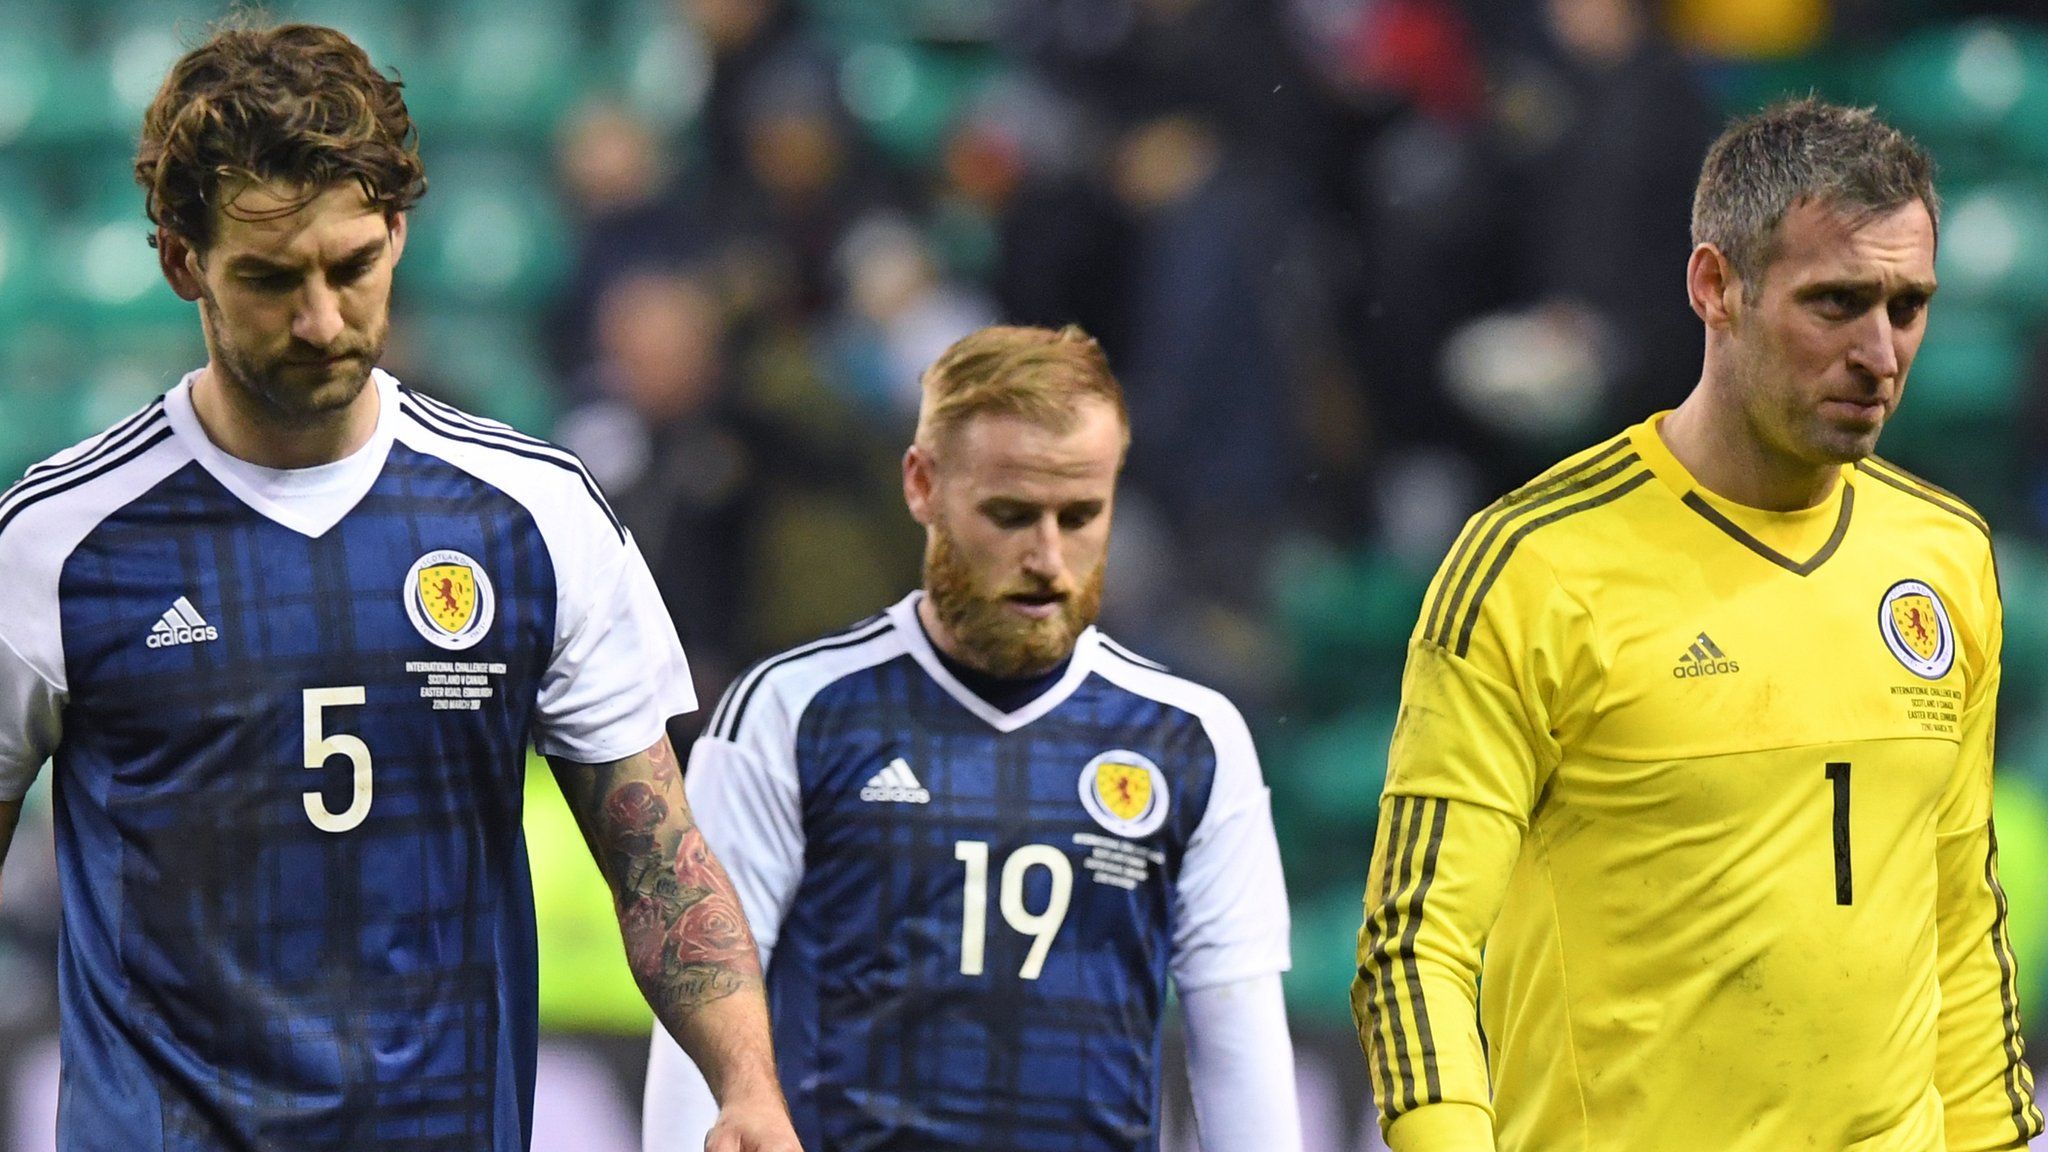 Charlie Mulgrew, Barry Bannan and Allan McGregor are left dejected at full time